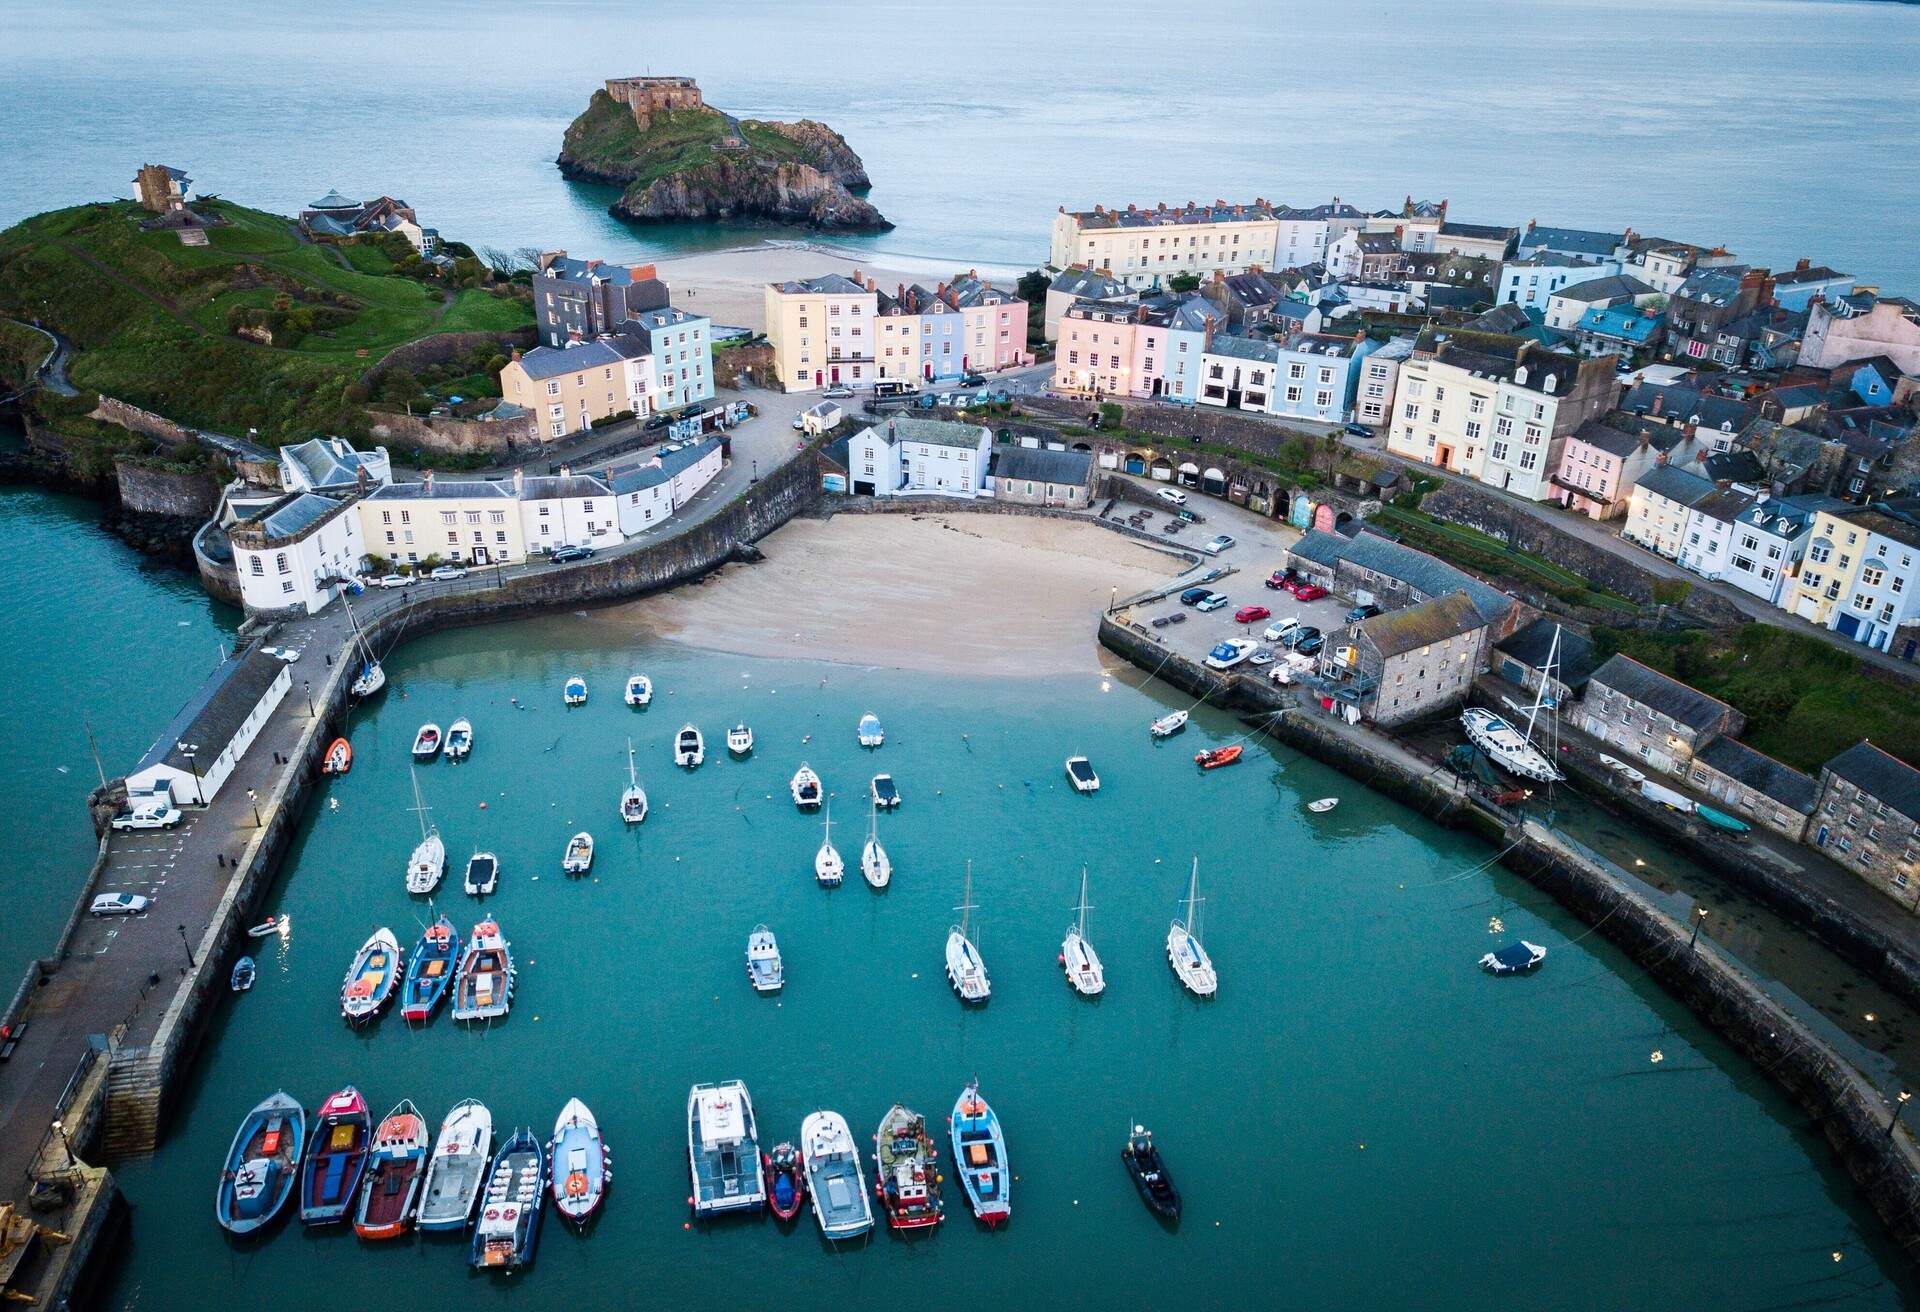 DEST_UK_WALES_TENBY_GettyImages-1006888228